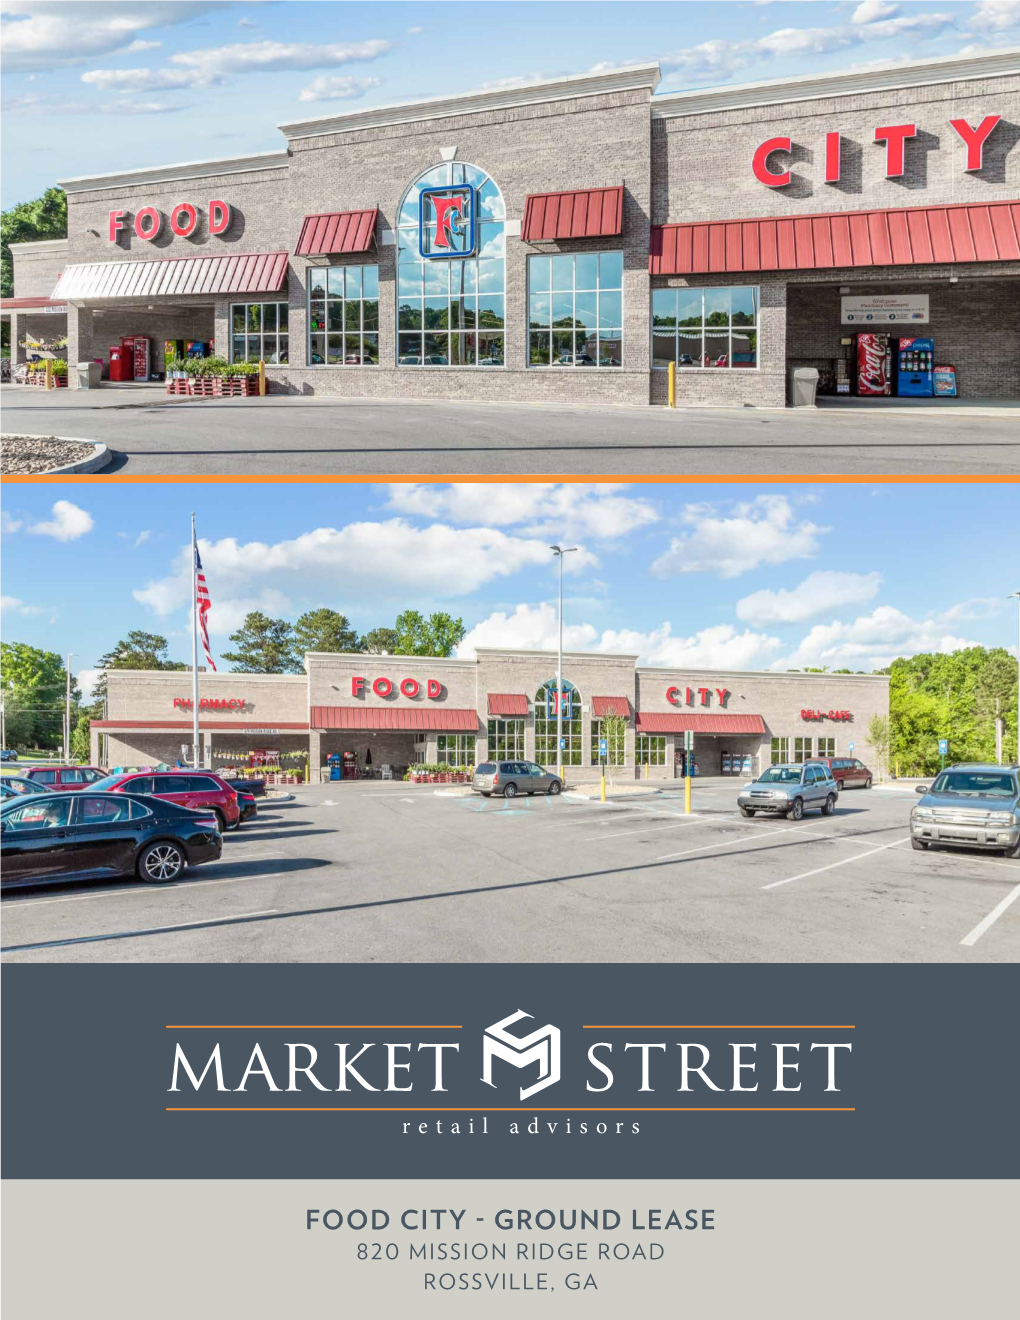 Food City - Ground Lease 820 Mission Ridge Road Rossville, Ga Chattanooga